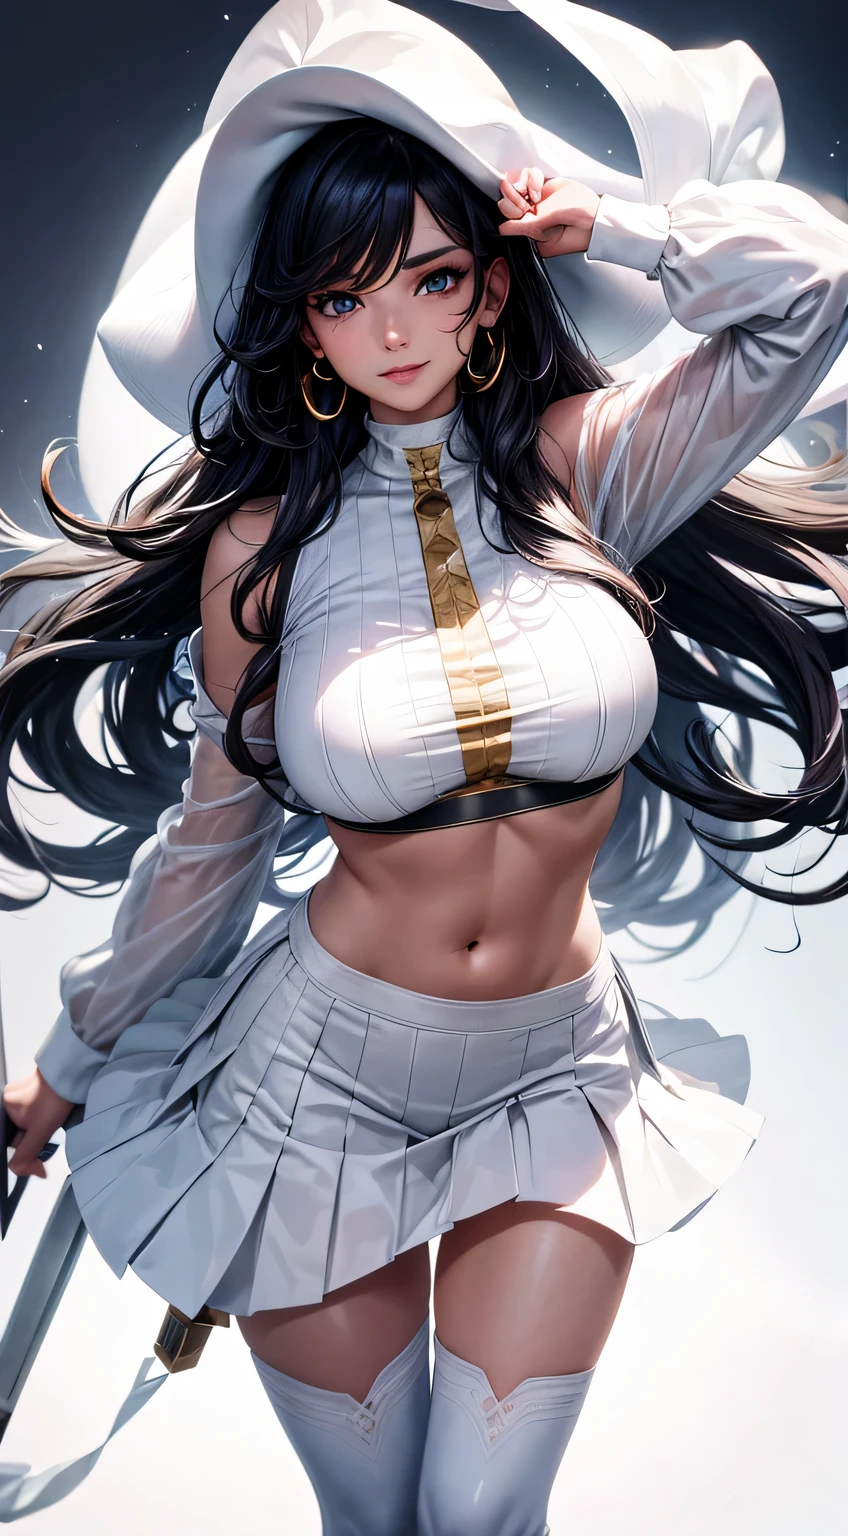 (best quality:1.5, highres, UHD, 4K, detailed lighting, shaders),black wavy hair, gradient hair, large breasts, white shirt, white skirt jeans, mature woman , white Witcher hat, (pov), white background, colorful red eyeshadow, dramatic lighting, smile eyepression, golden earrings, flowing hair, delicate facial features, dark skinned, high cheekbones, white background, stand up, lean forward, full body, black skin